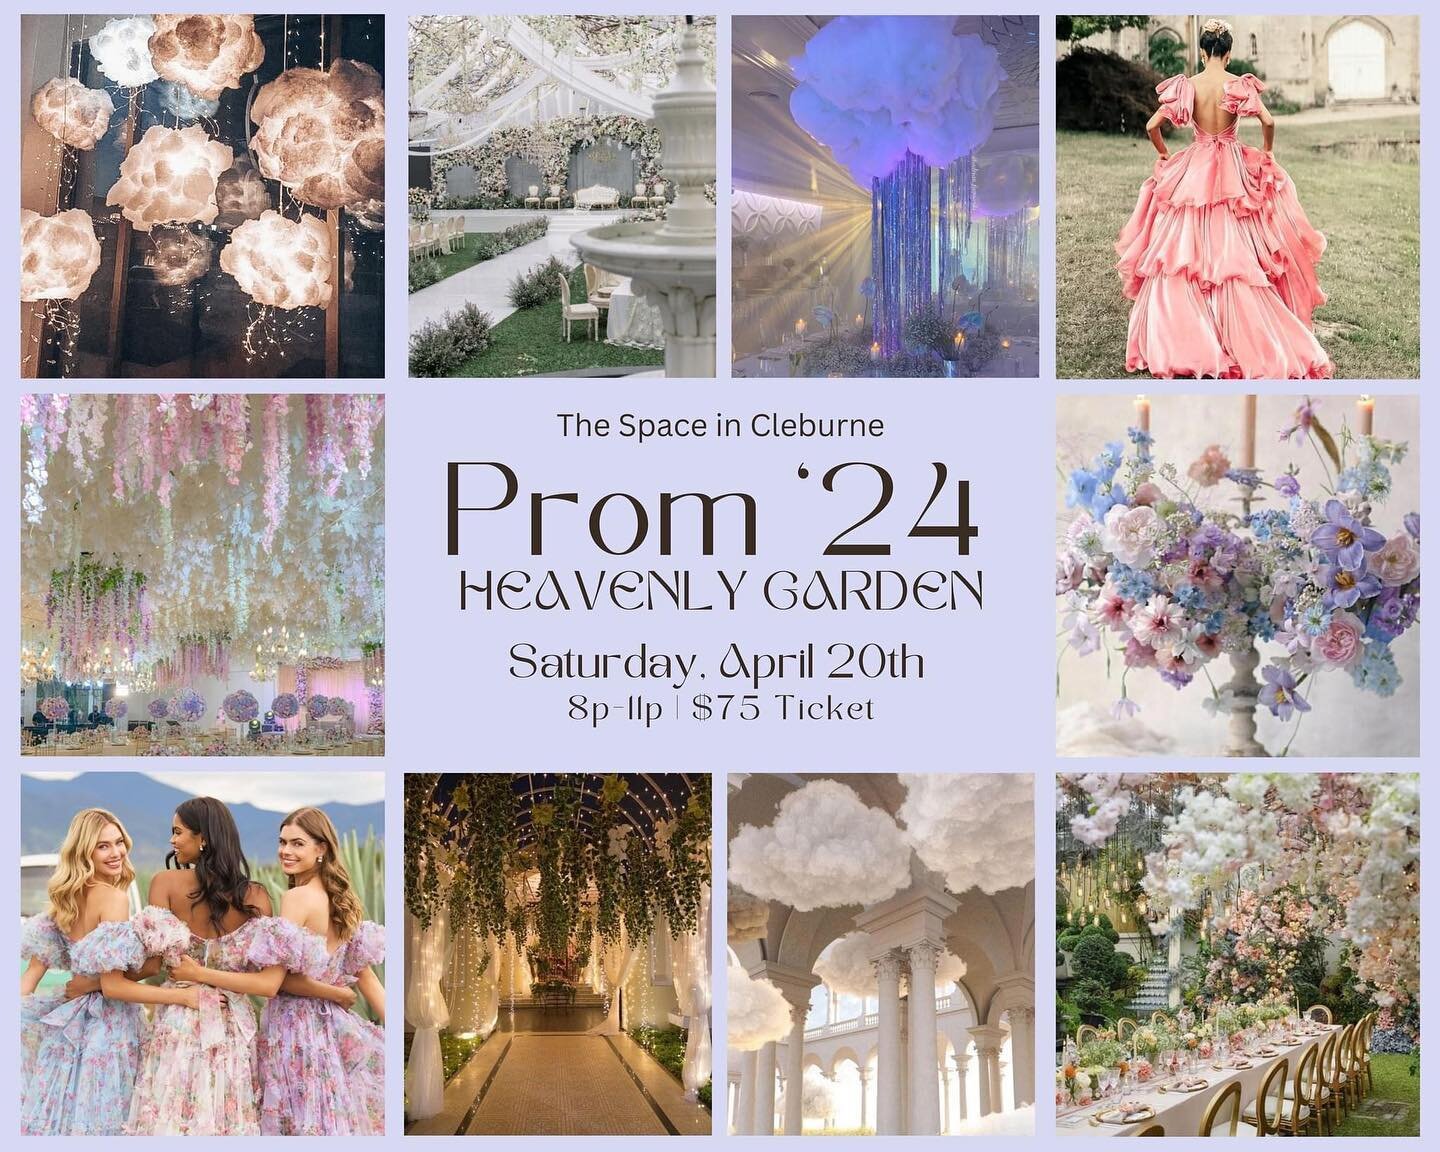 Prom is just around thee corner! We have had so much fun starting to put together this theme and decor. What an absolute dream!! 

The last of the tickets are available so now is a good time to grab them before they are gone! 

https://www.thespacein